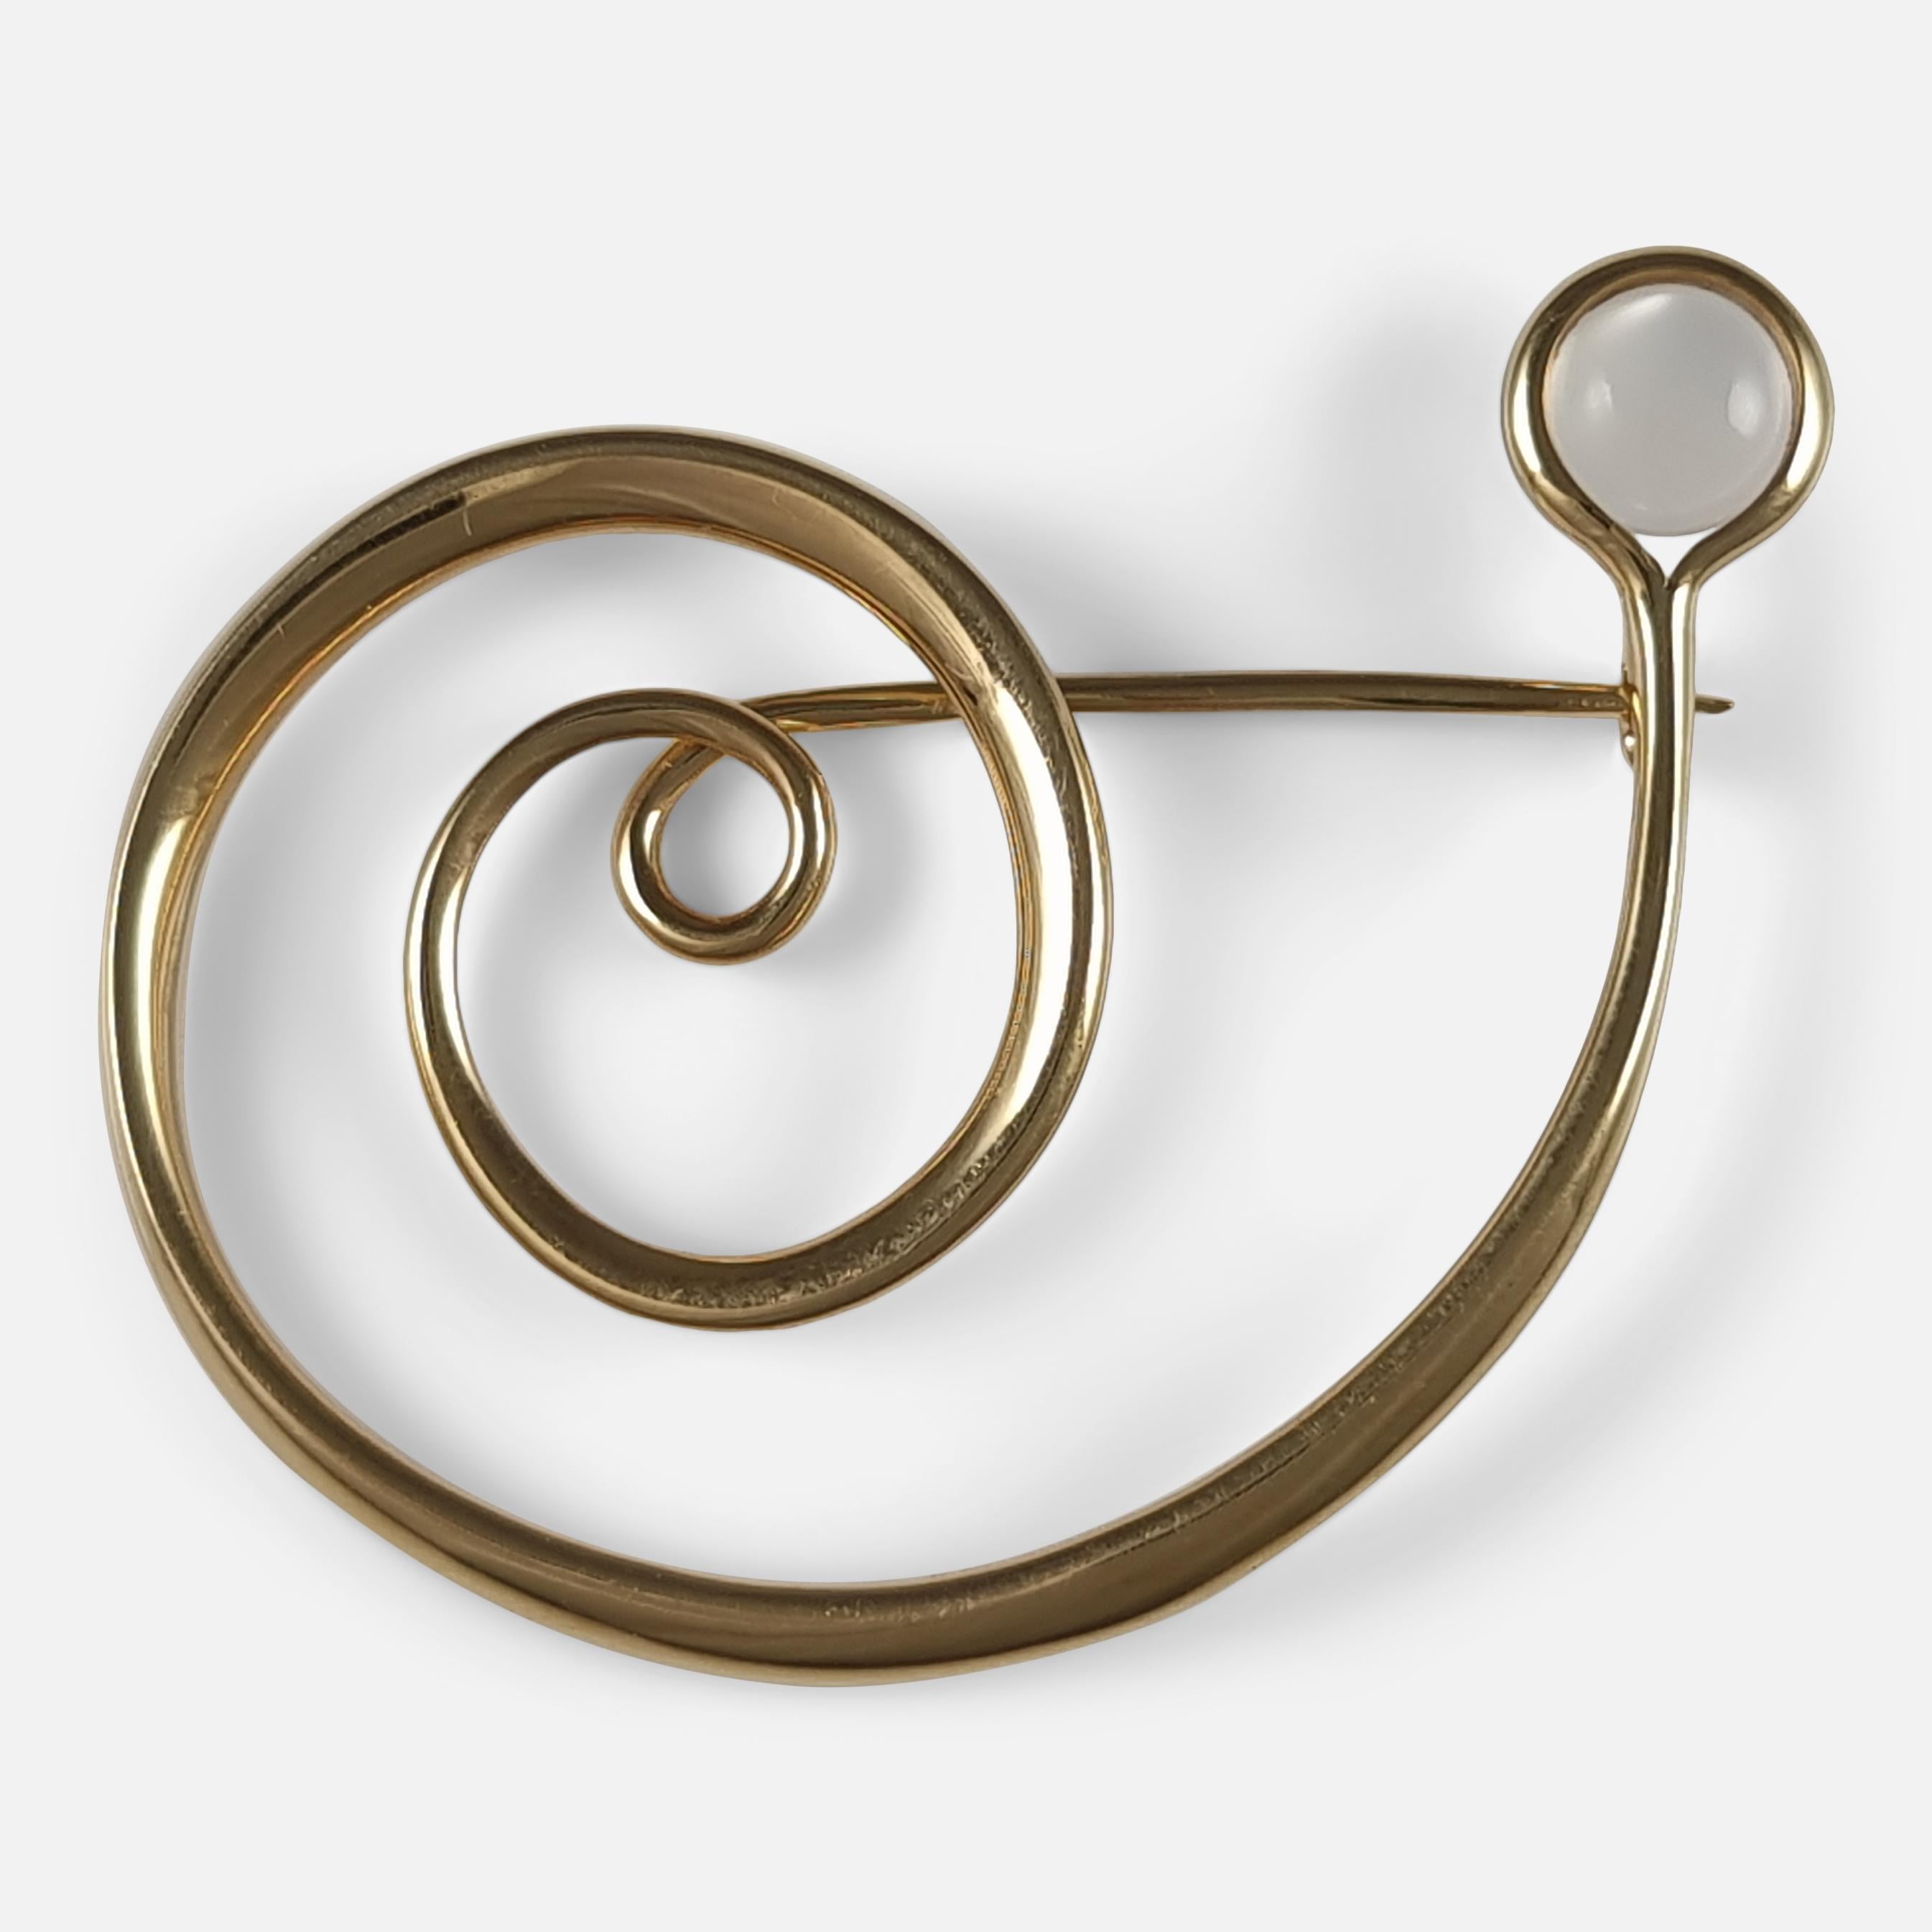 An 18ct yellow gold and moonstone cabochon spiral brooch #1427, designed by Vivianna Torun Bülow-Hübe for Georg Jensen.

The brooch is stamped with the Georg Jensen mark used since 1945, '750', '1427', & 'TORUN'. Also hallmarked to the pin with